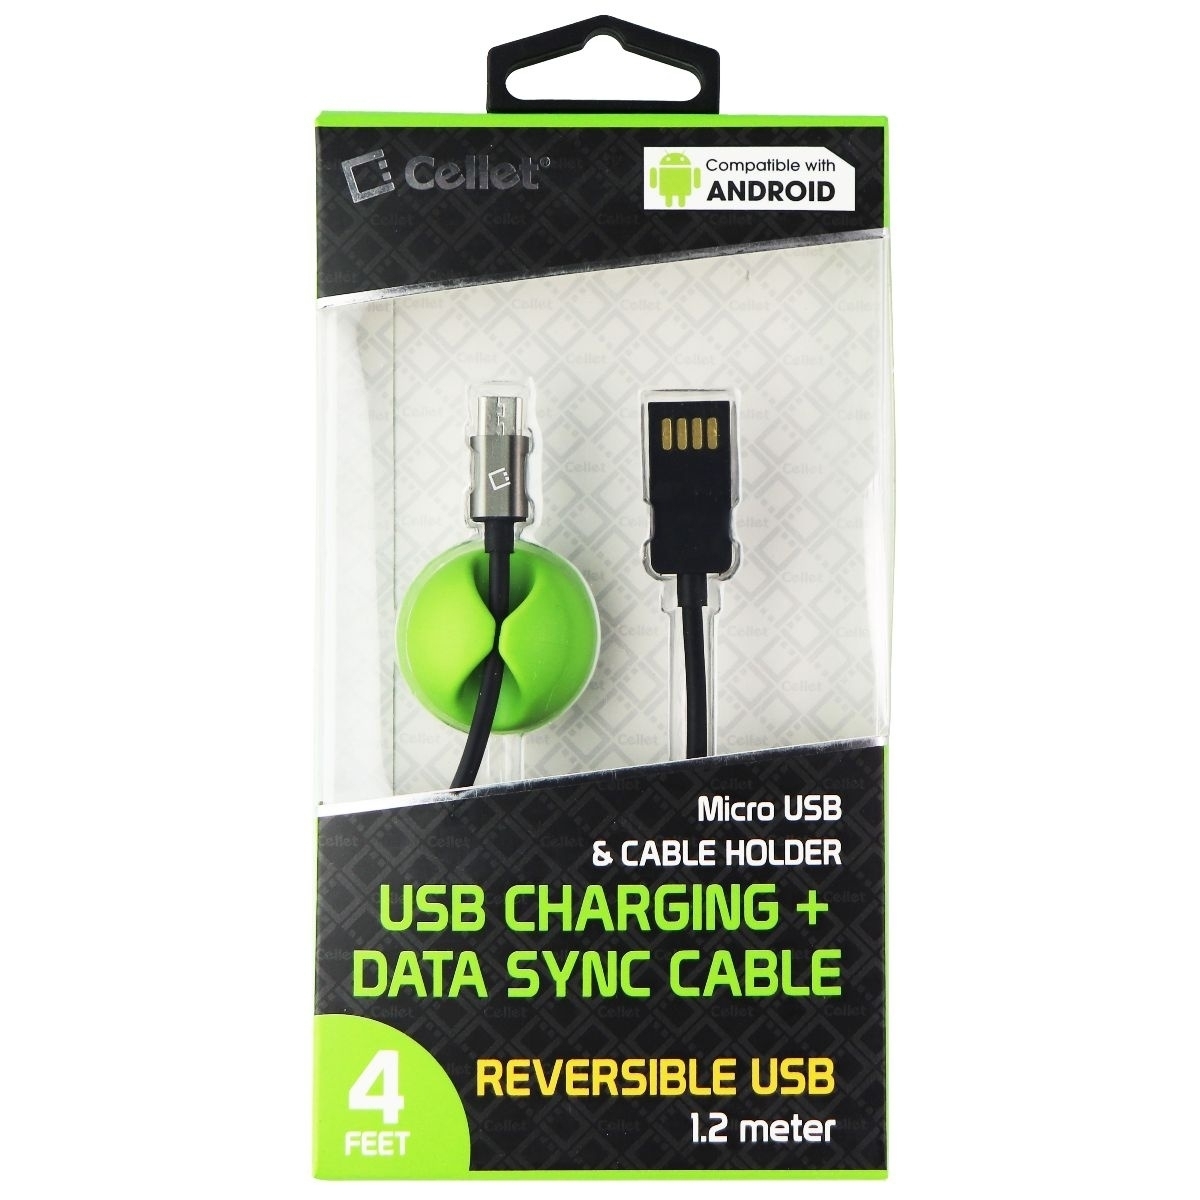 Cellet Micro USB & CABLE HOLDER USB Charging + Data Sync Cable (4FT) - Black